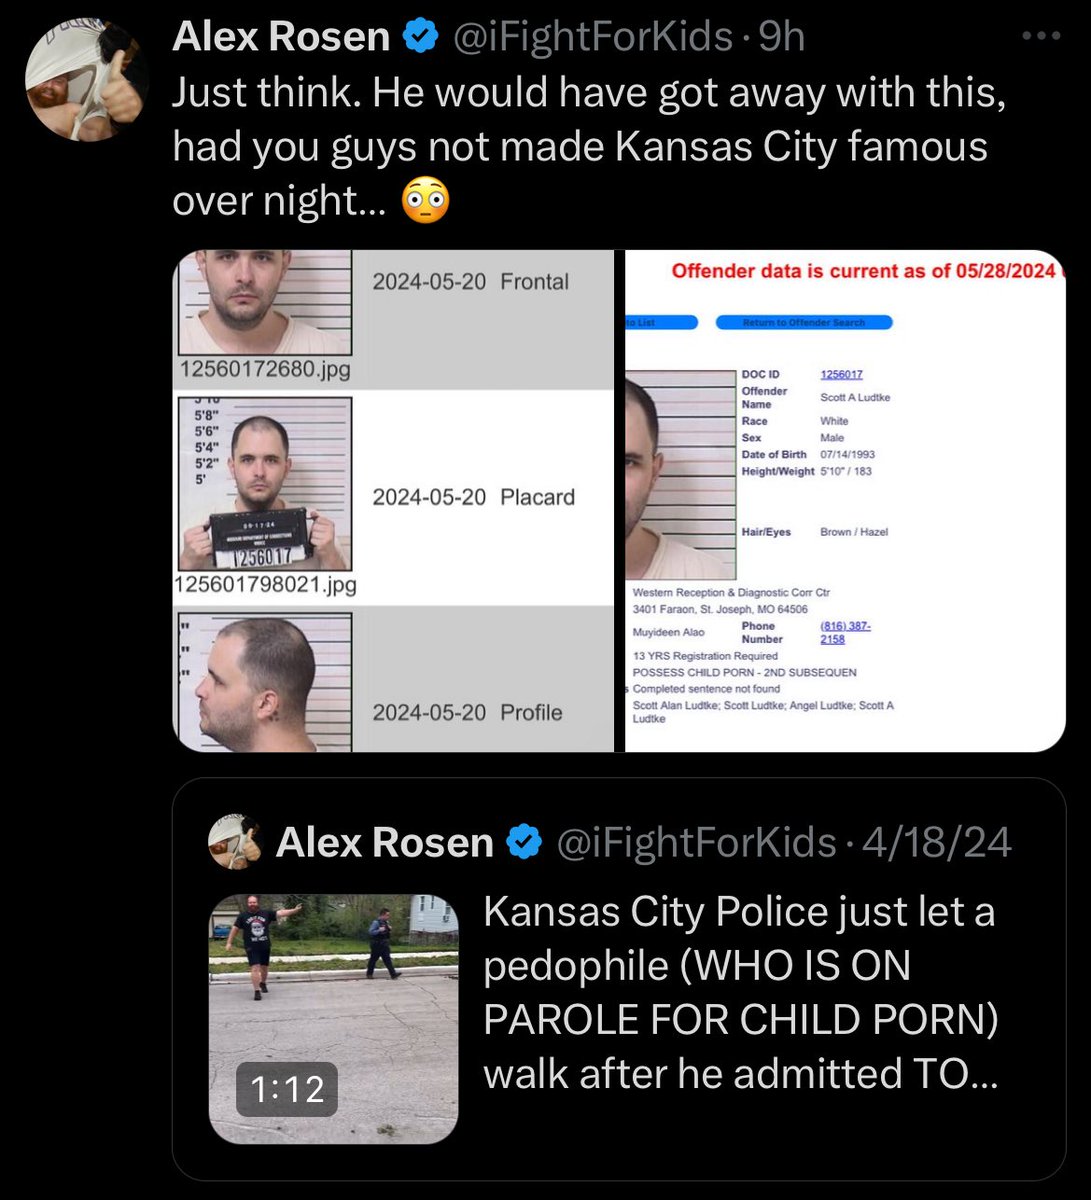 It’s crazy that I just made a post earlier with an update on the Kansas City police situation, who also let a pedo go in April. They have since arrested him after we called them out. Now we will do the same for @BrunswickPolice. Just goes to show how much of a problem this